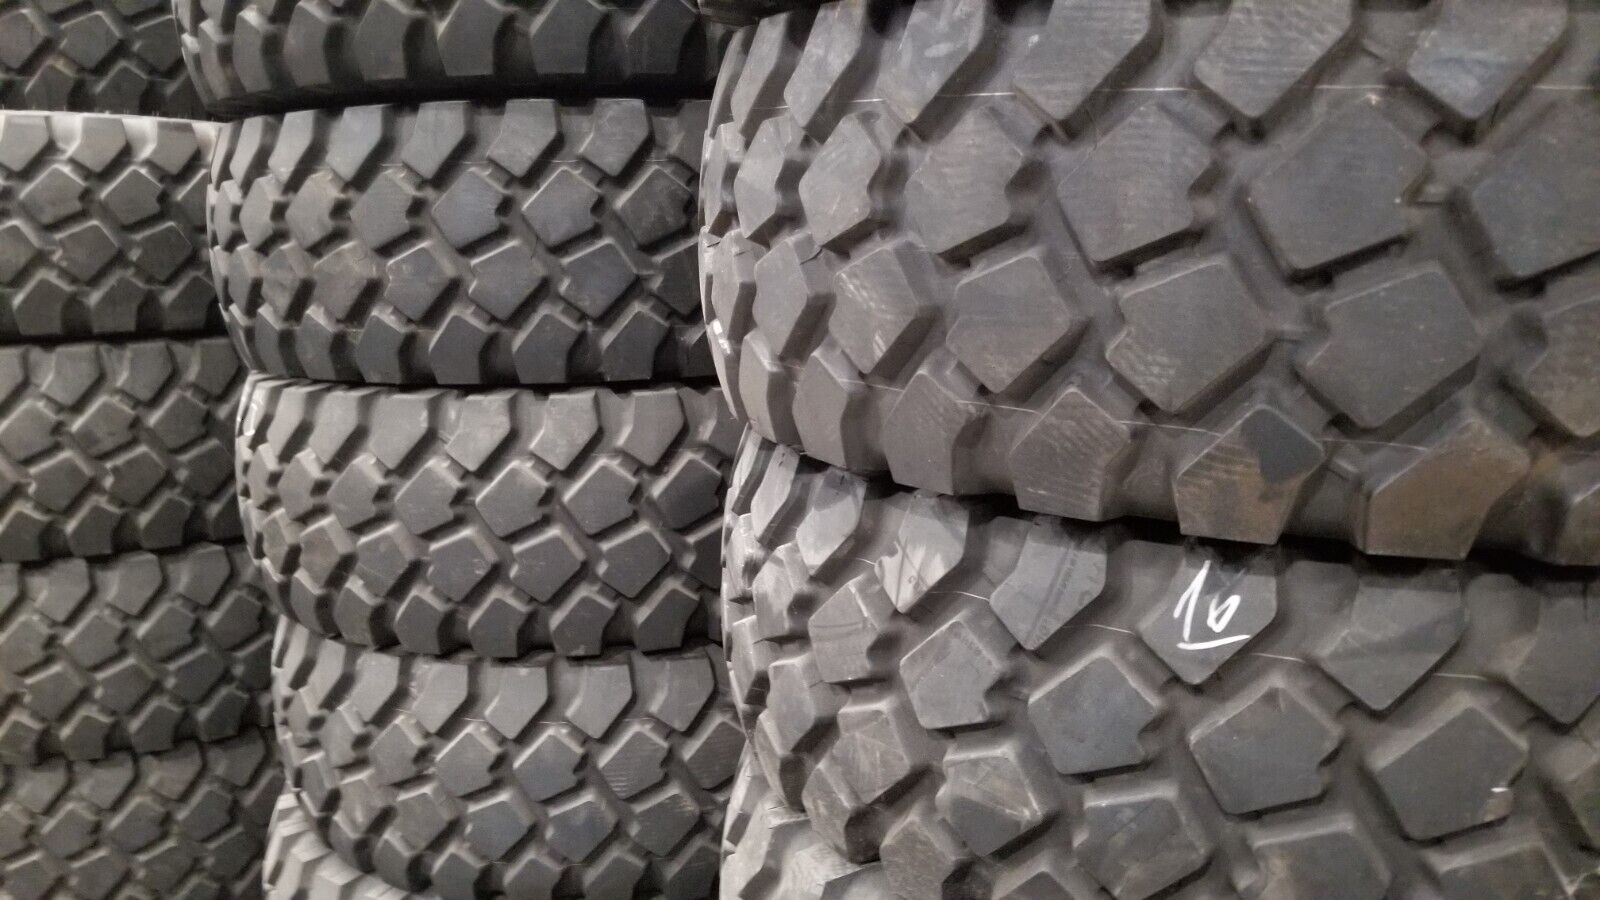 325/85R16 MICHELIN X FORCE ZL VERY LIGHTLY USED 85% TO 95% TREAD 12 PLY